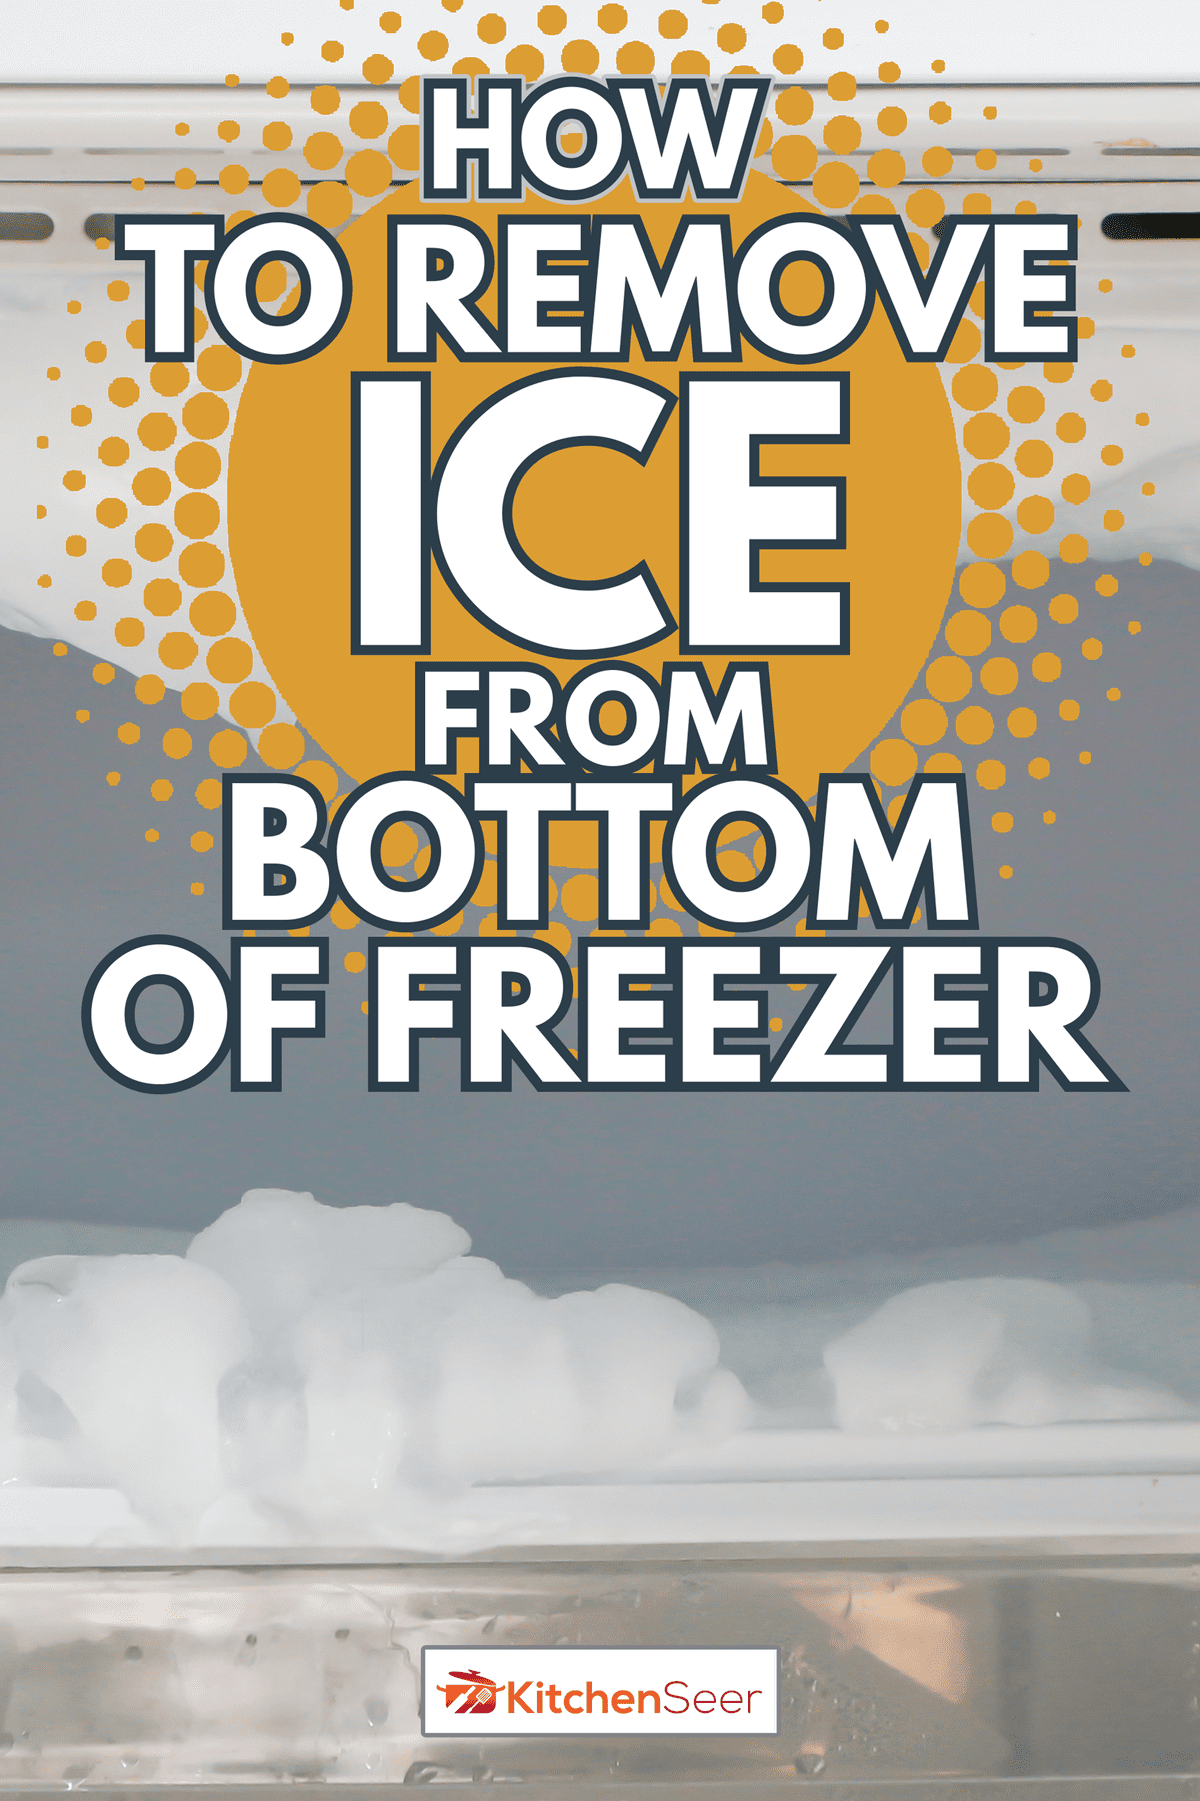 Many Ice frozen in the fridge - How to Remove Ice from Bottom of Freezer